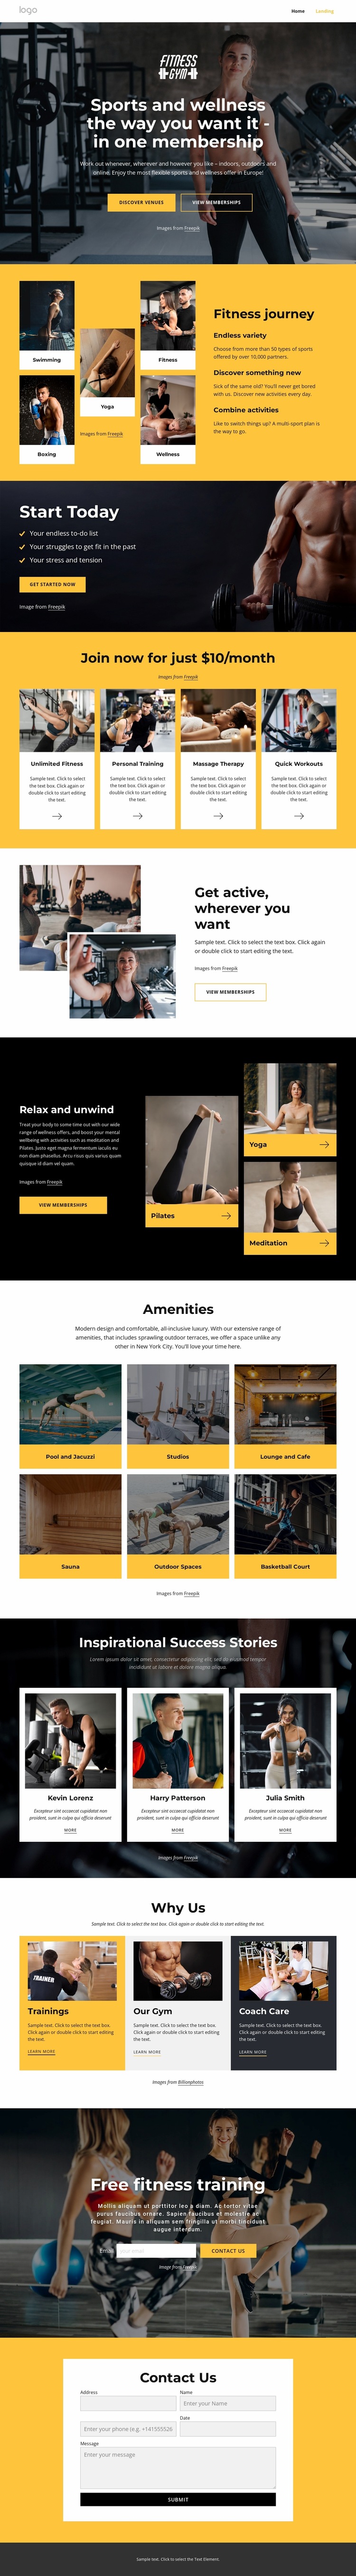 Gym, swimming, fitness classes Website Builder Templates